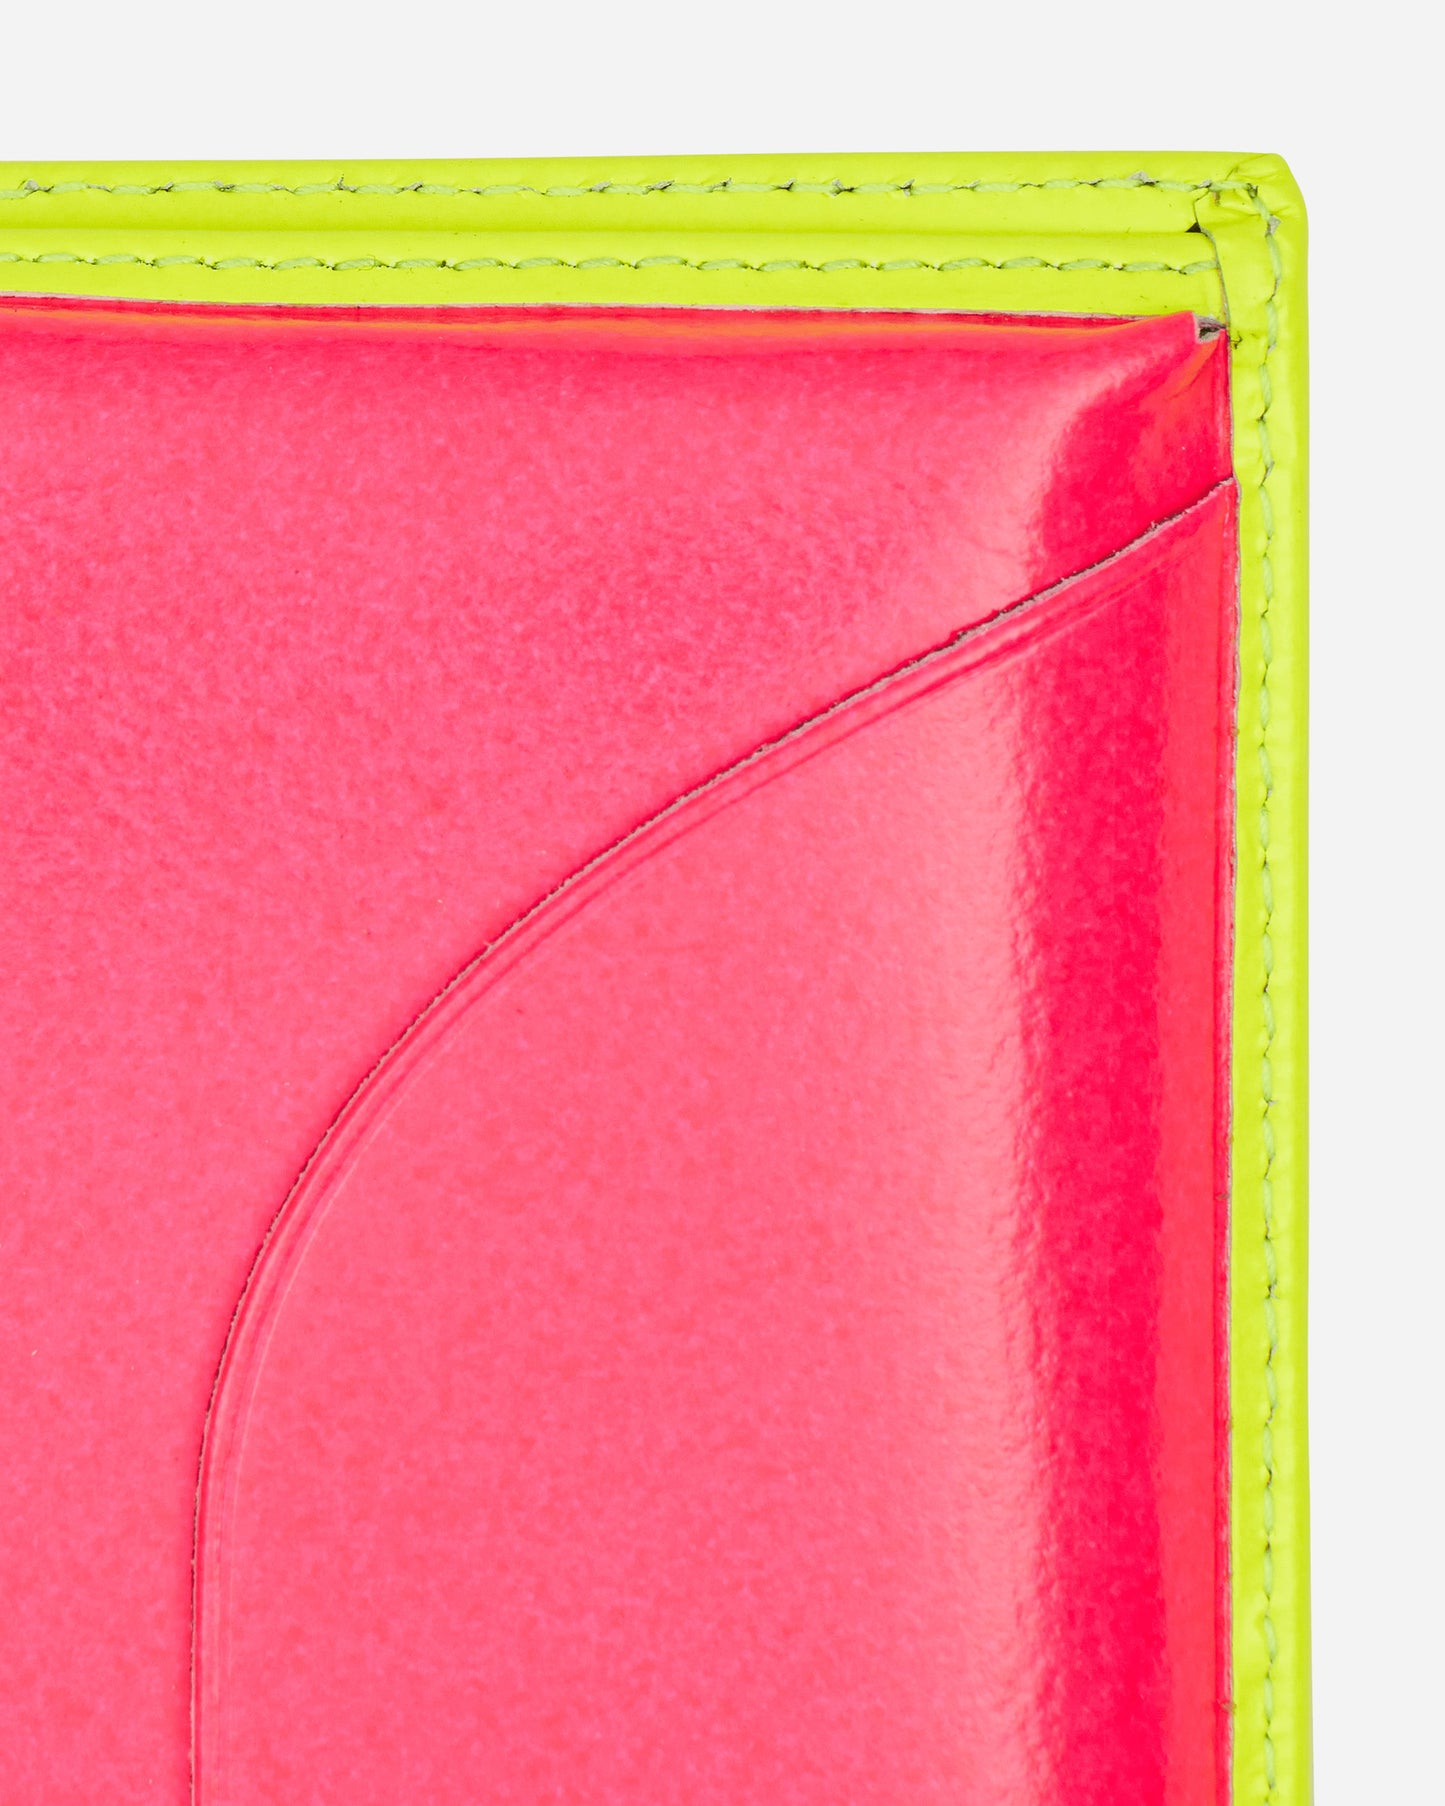 Comme Des Garçons Wallet Super Fluo Wallet Yellow/Orange Wallets and Cardholders Wallets SA0641SF 4